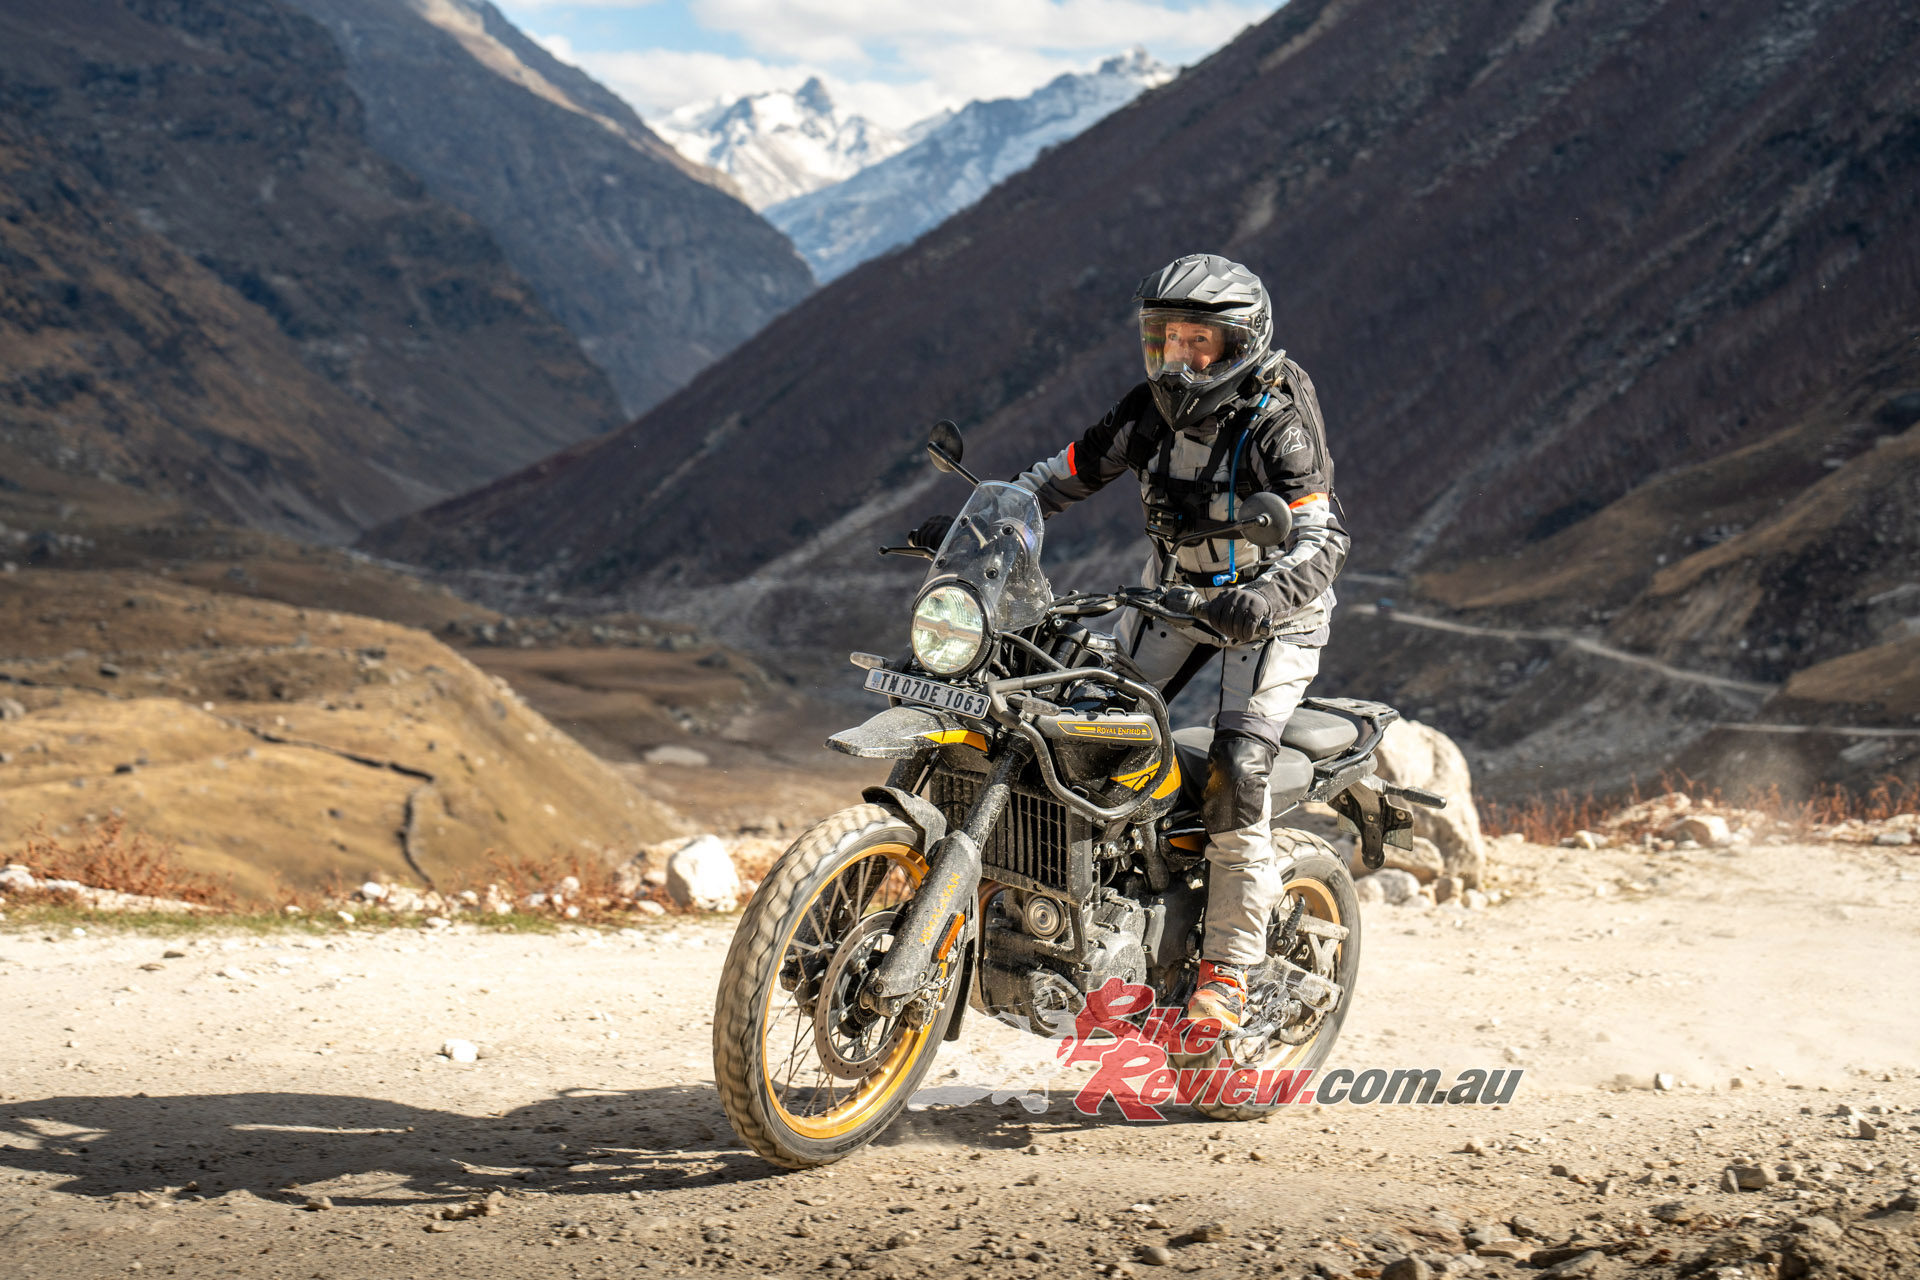 Heading to the Himalayas for two full days of riding with a brand-new, untried helmet could have been a bad idea, but not with the Airoh Commander.